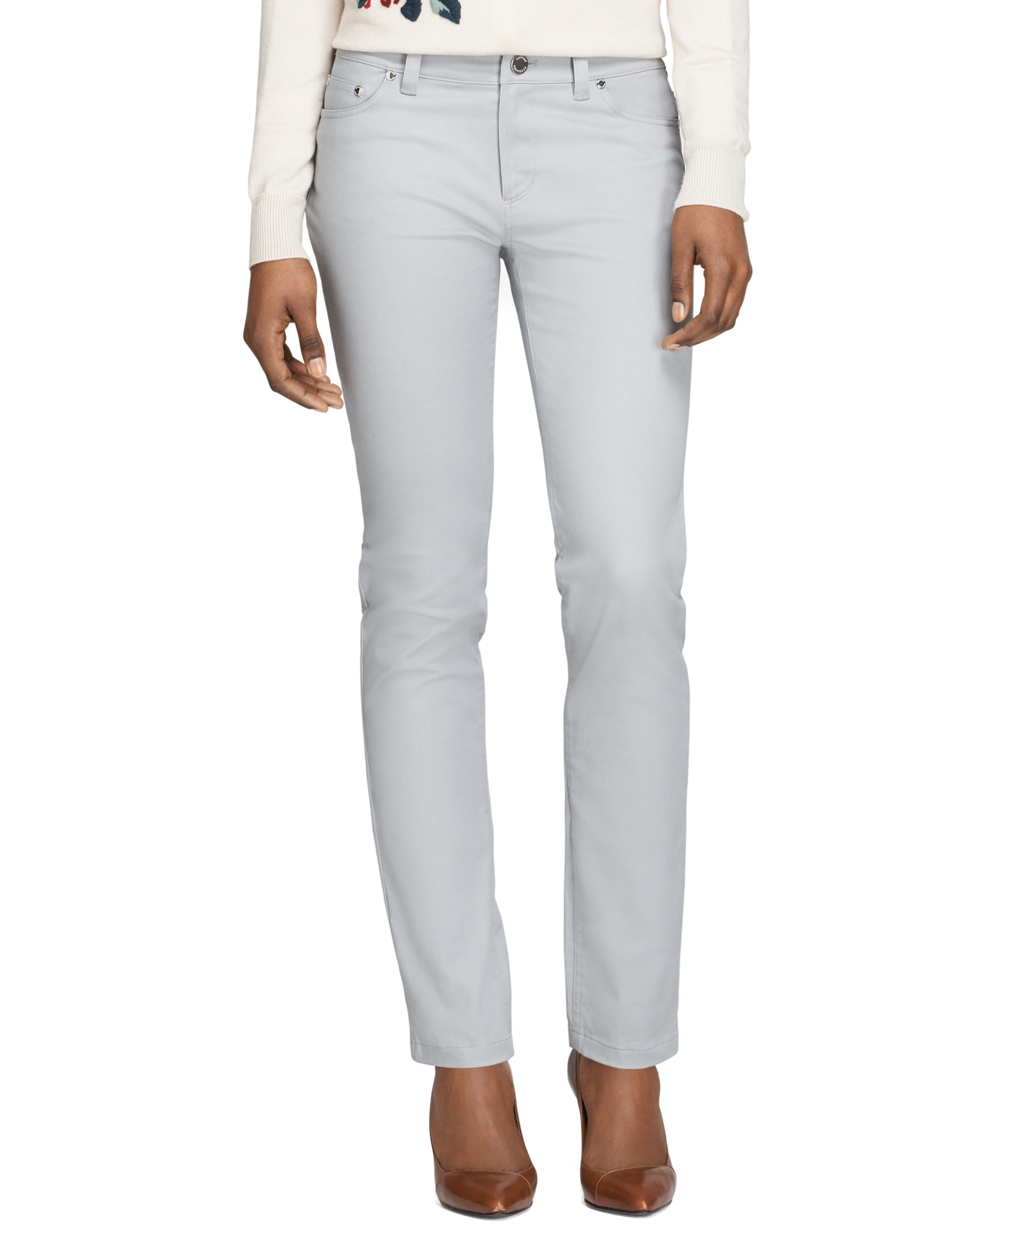 Lyst - Brooks Brothers Natalie Fit Five-pocket Pants in Gray